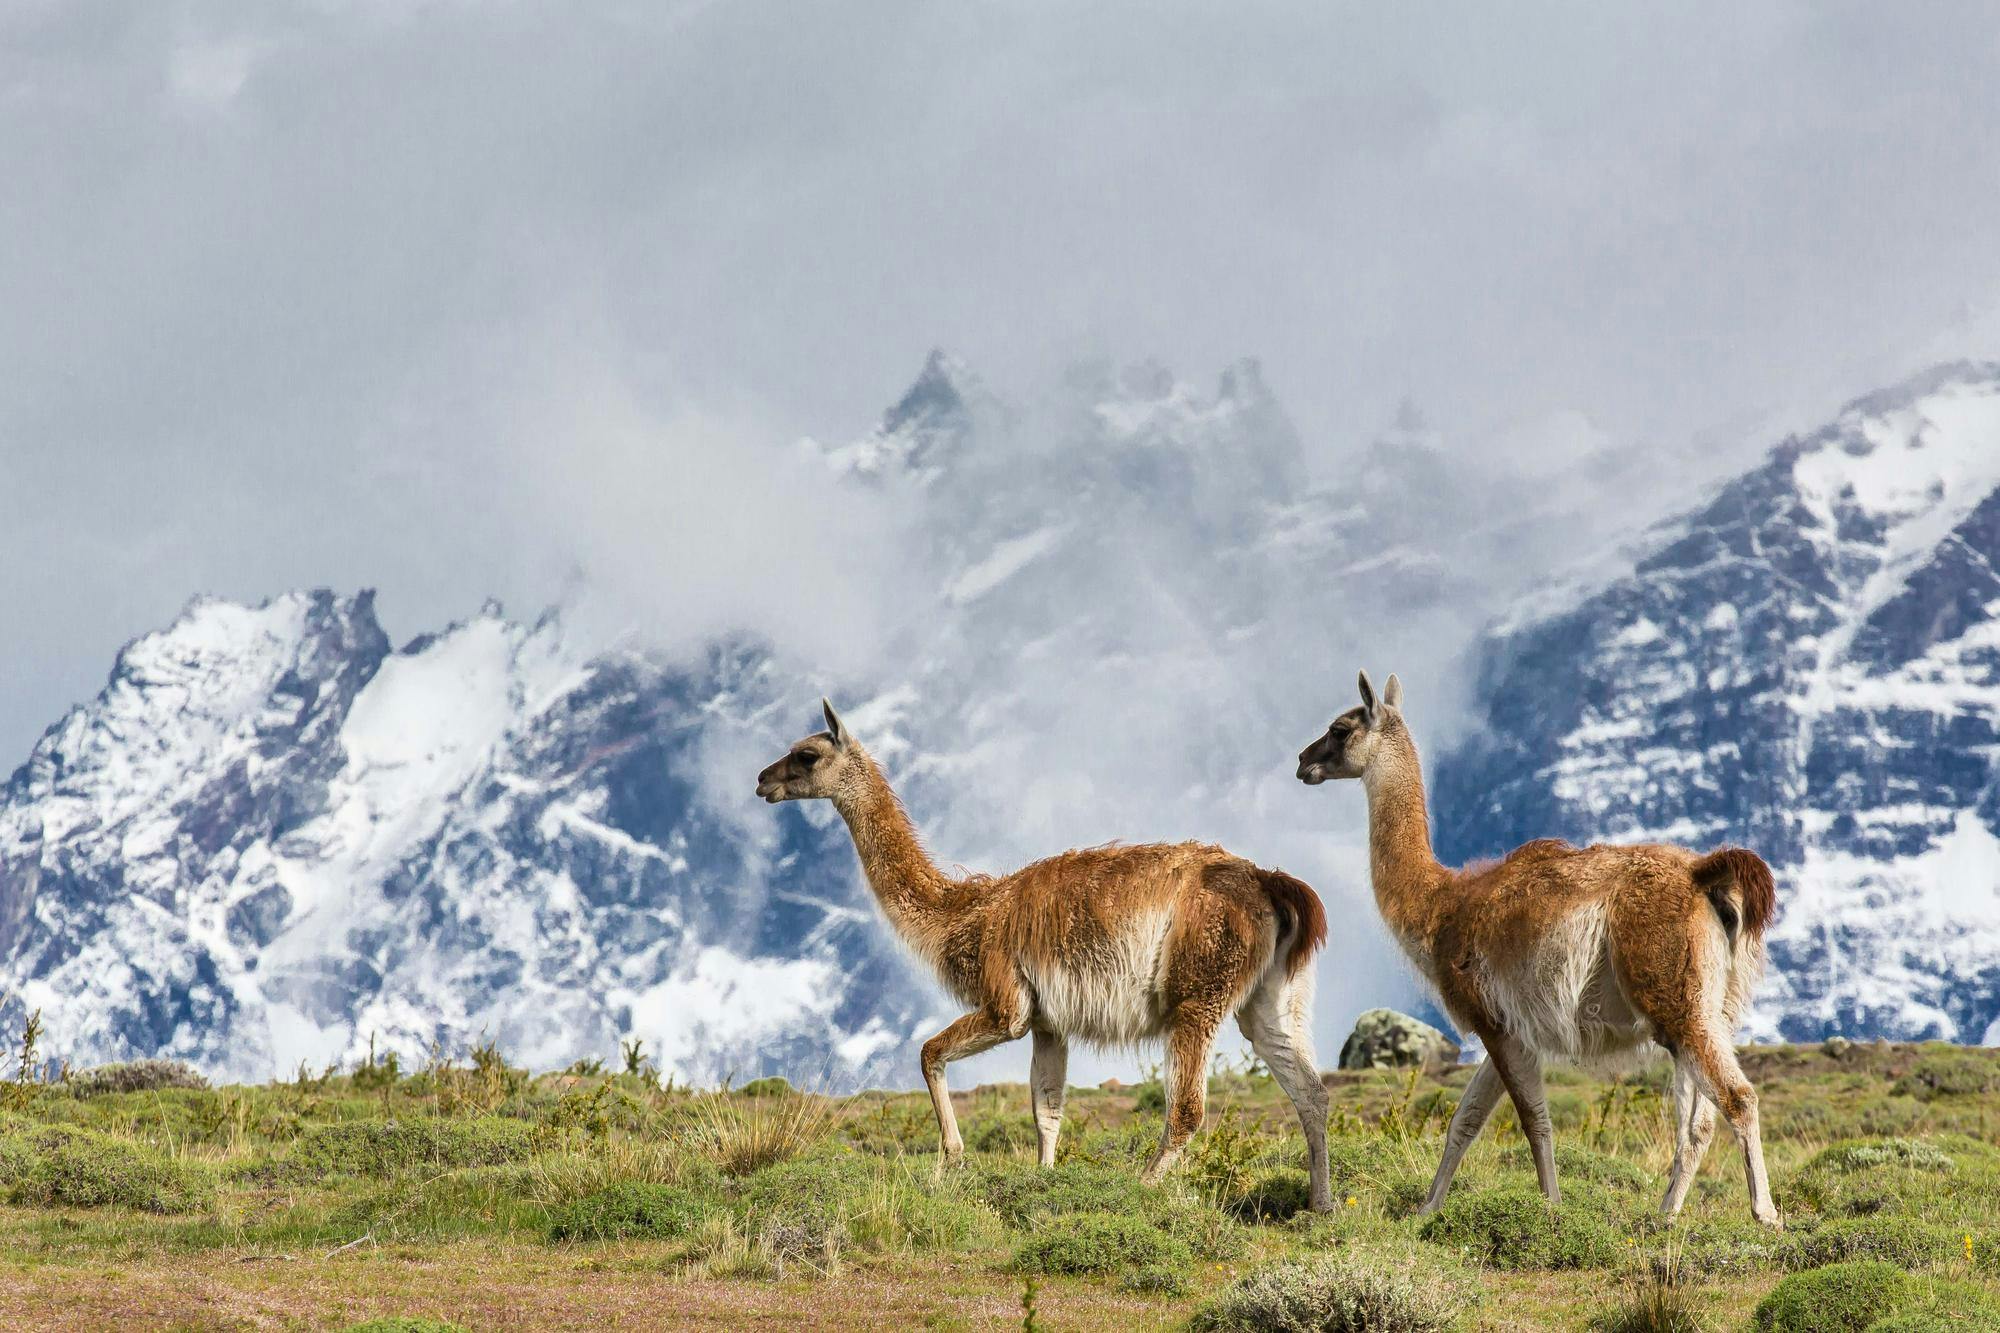 Adult guanaco in Torres del Paine National Park, Patagonia, Chile.